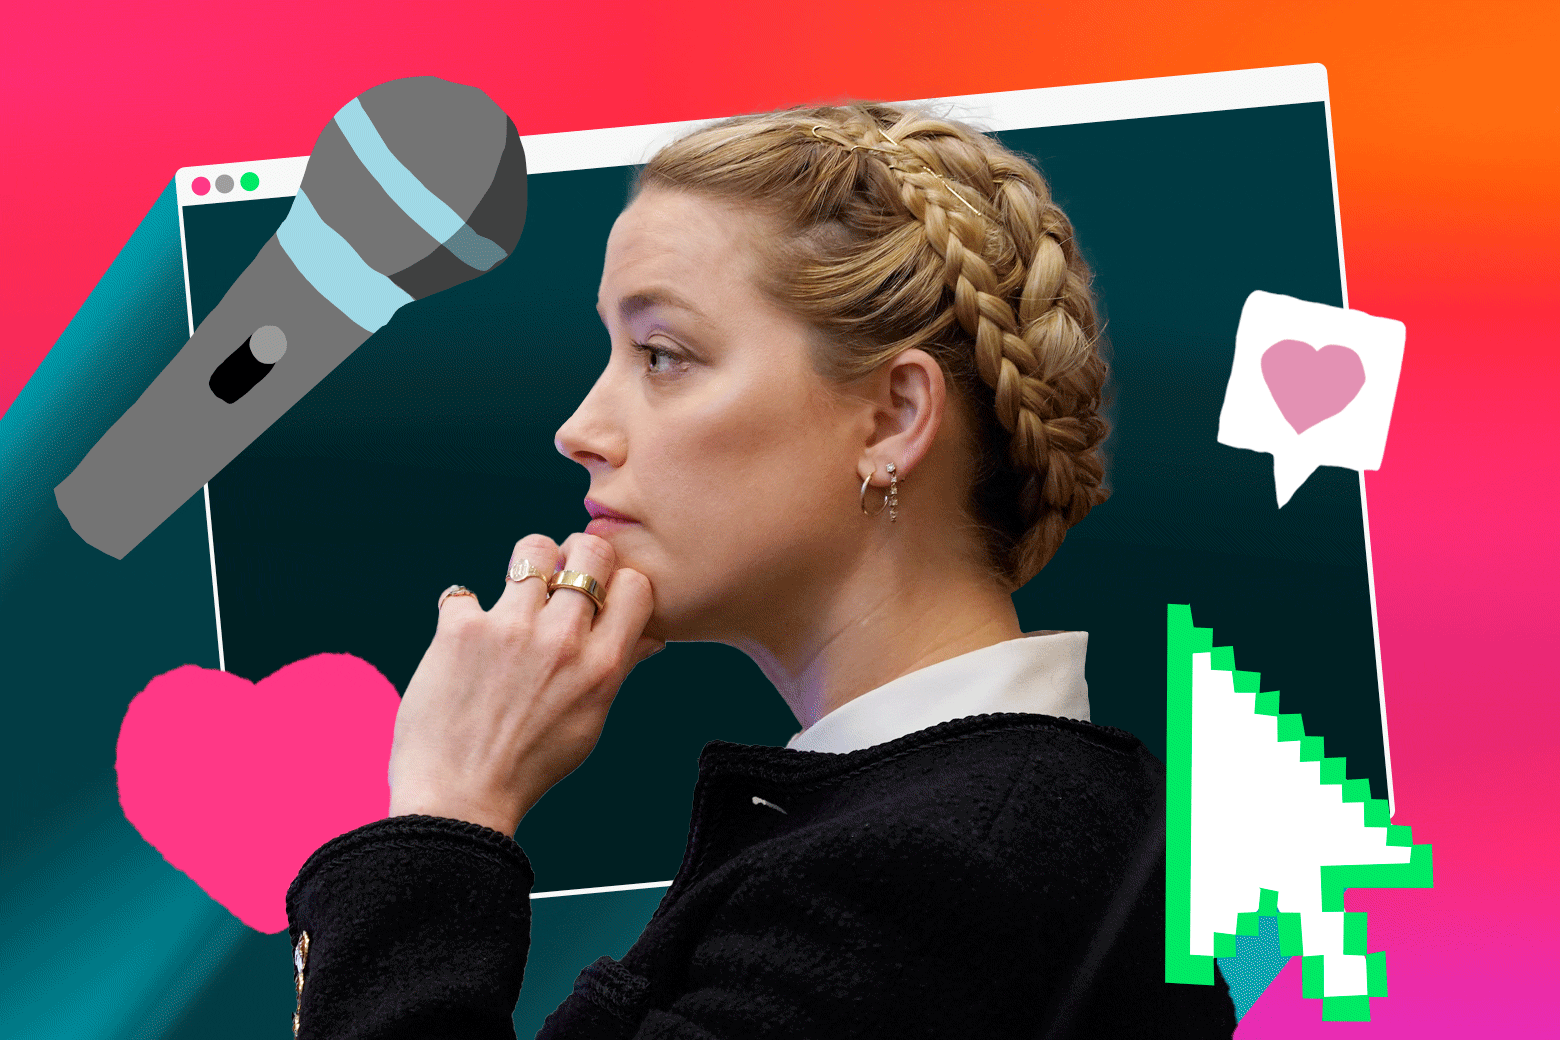 Amber Heard sits in profile, touching her chin, against a computer screen background. She is surrounded by wiggling illustrations of a microphone, a heart, a notification symbol, and a mouse pointer.